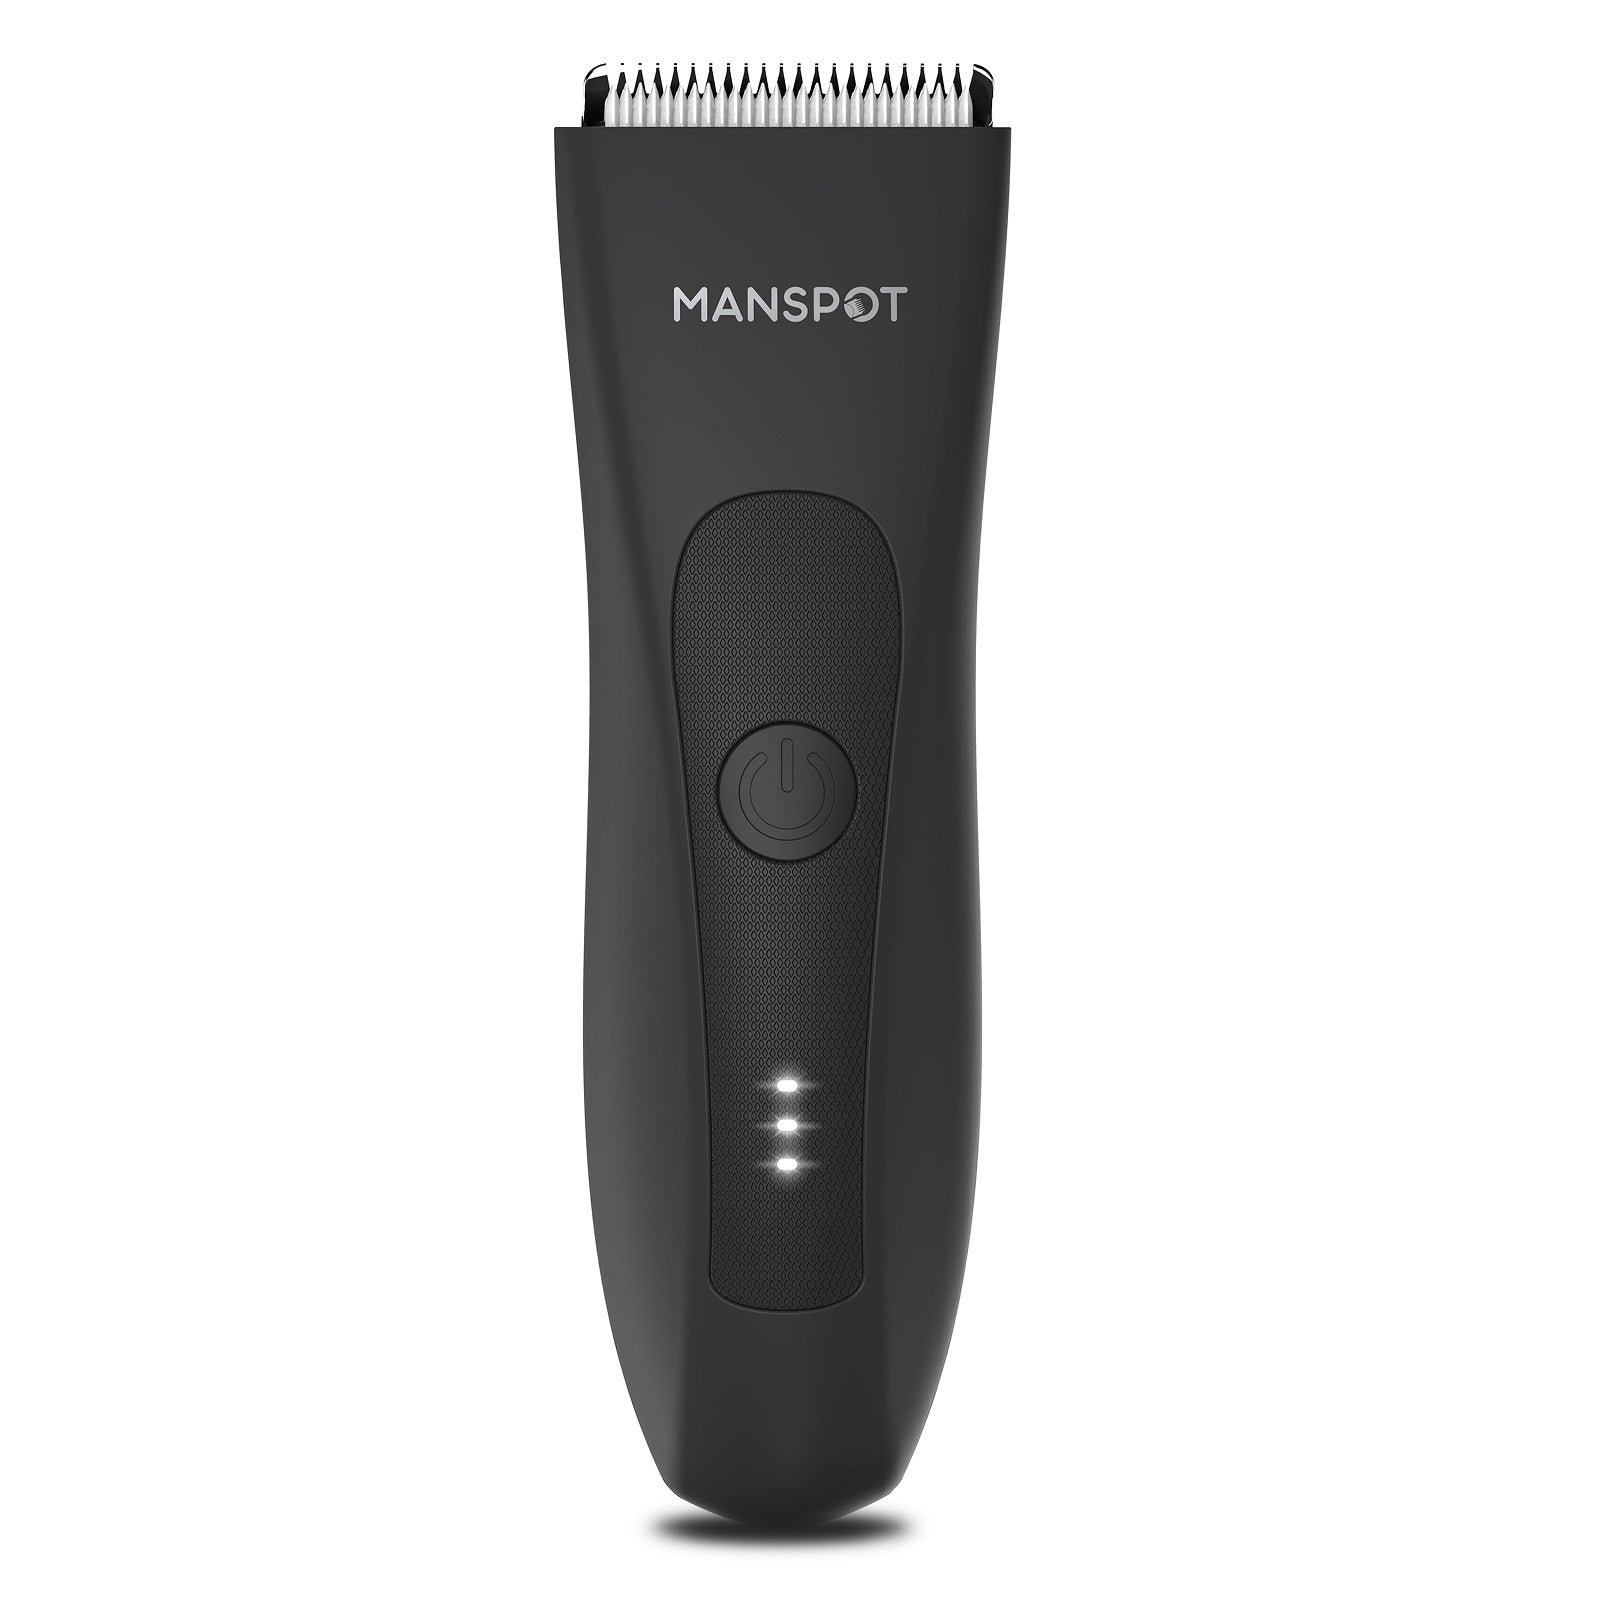  MANSPOT Groin Hair Trimmer for Men, Electric Ball  Trimmer/Shaver, Replaceable Ceramic Blade Heads, Waterproof Wet/Dry Groin &  Body Shaver Groomer, 90 Minutes Shaving After Fully Charged : Beauty &  Personal Care